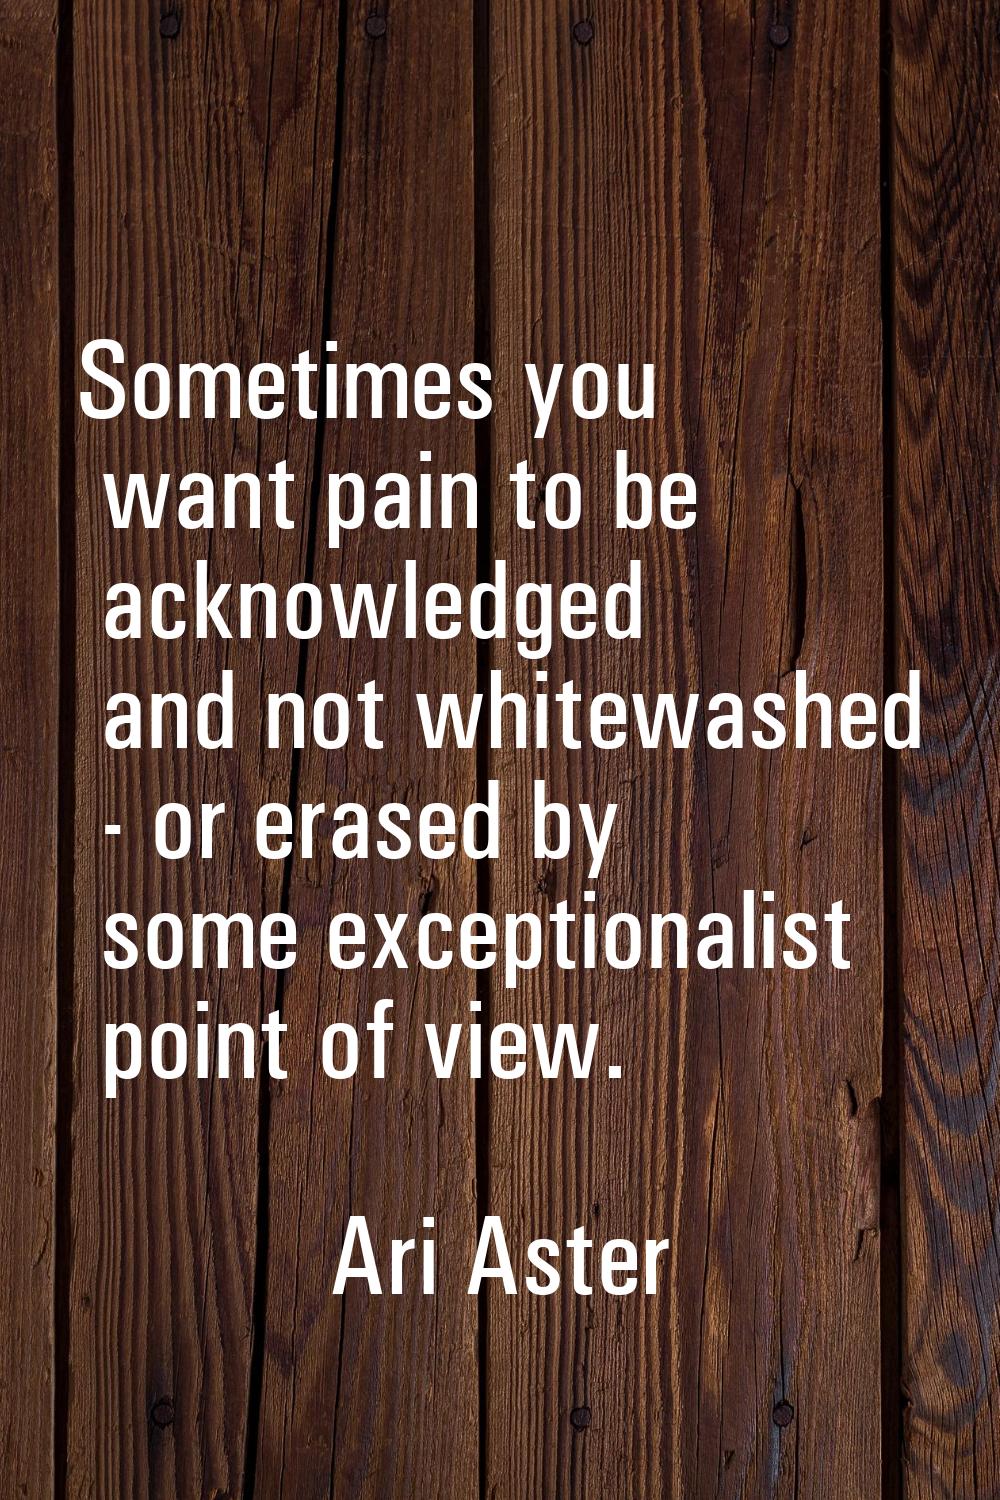 Sometimes you want pain to be acknowledged and not whitewashed - or erased by some exceptionalist p